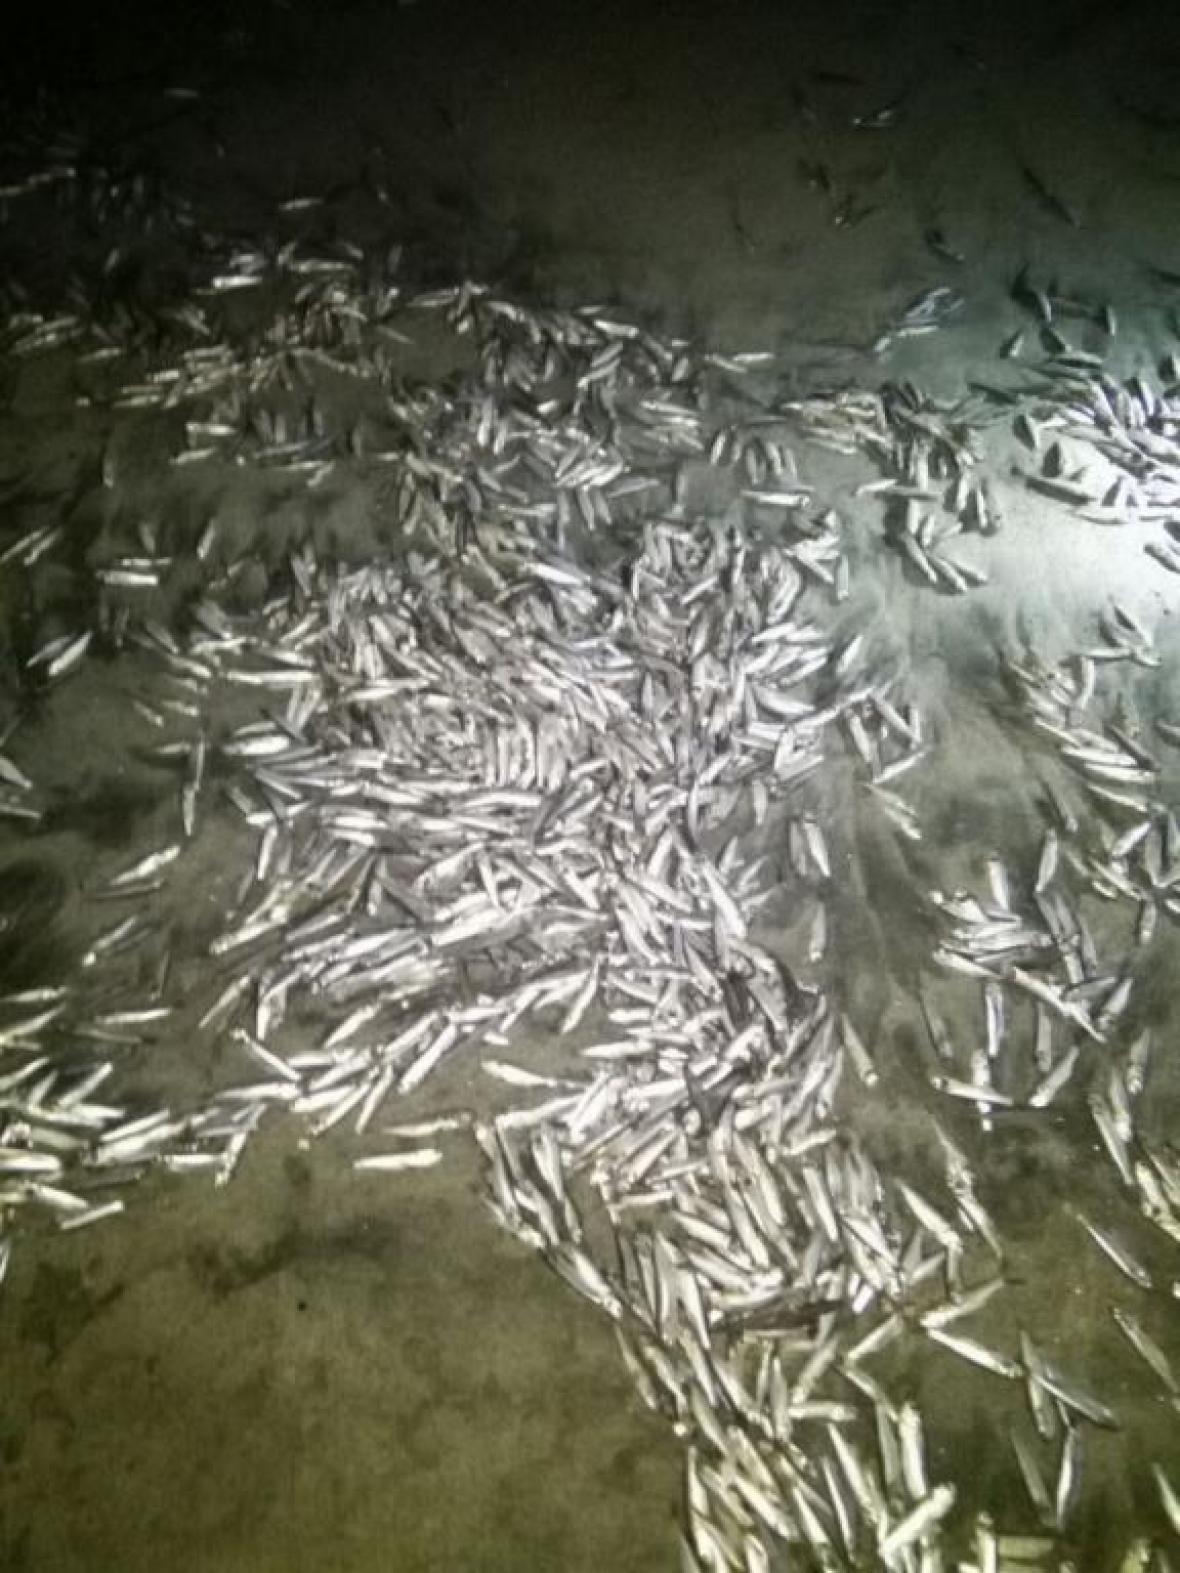 colombia die-off, colombia fish die-off, Thousands of dead fish were found on a 4-km beach in Colombia. via El Heraldo